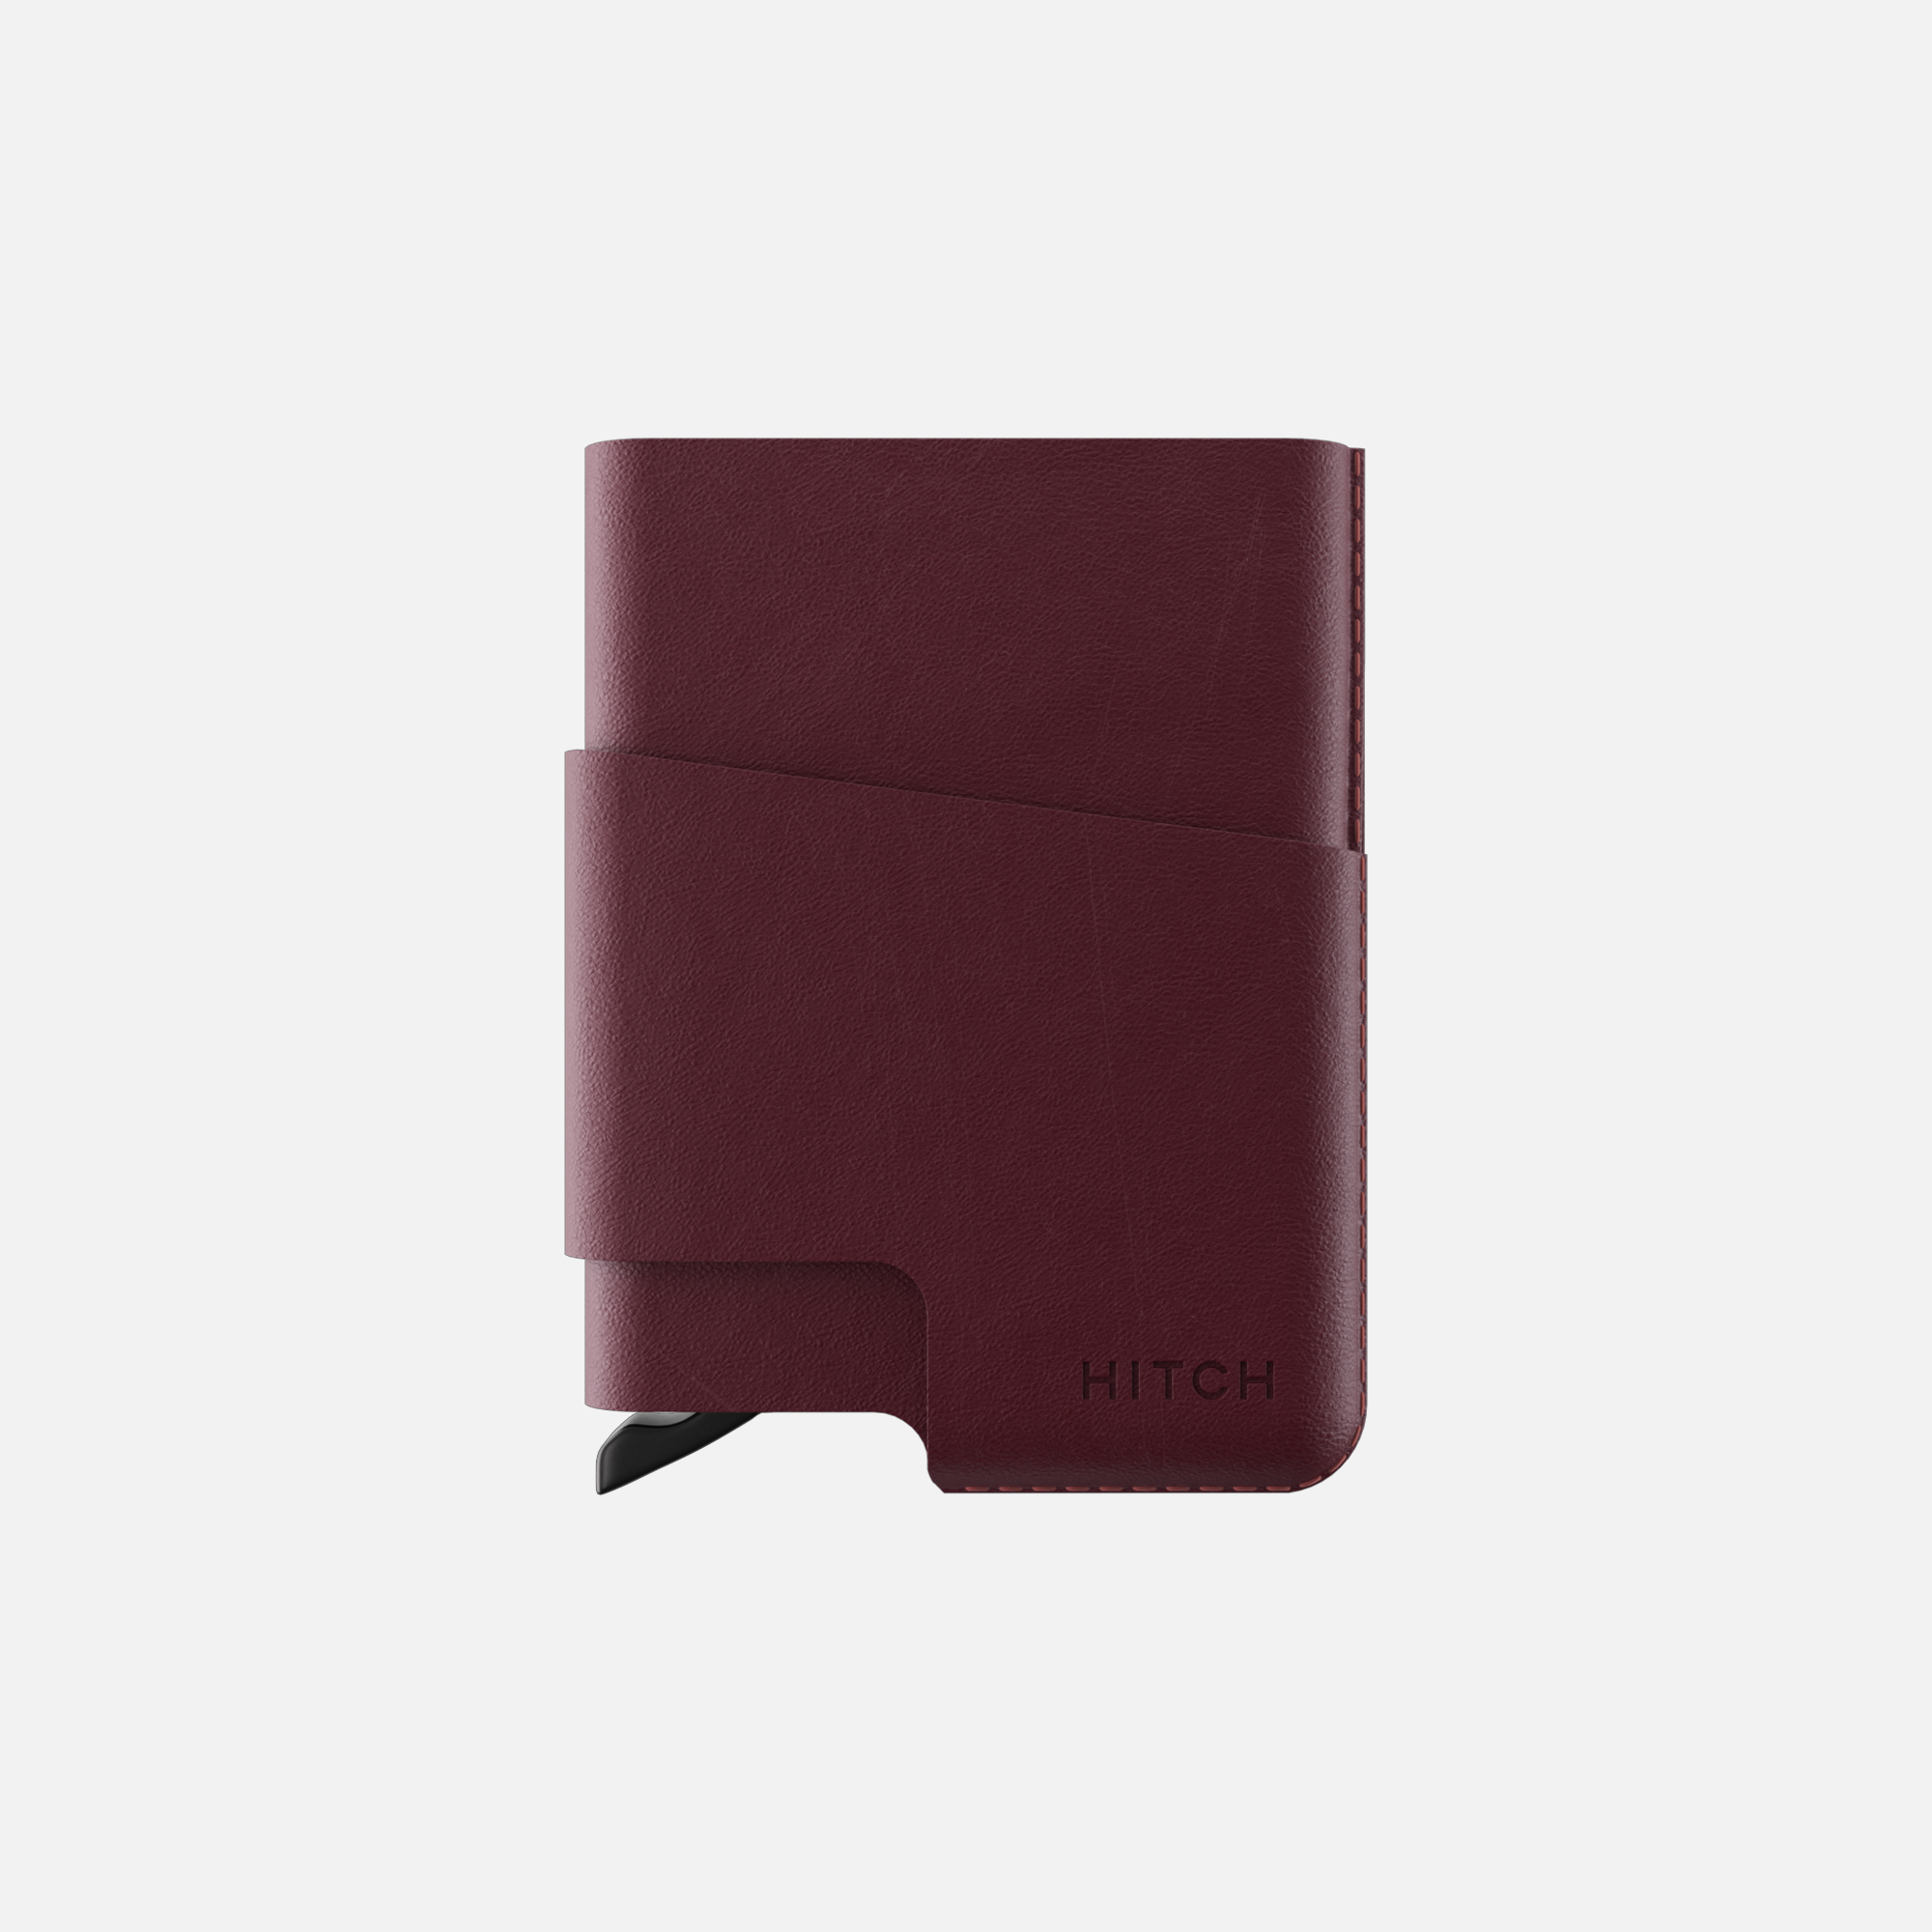 Burgundy leather cardholder wallet isolated on a white background.